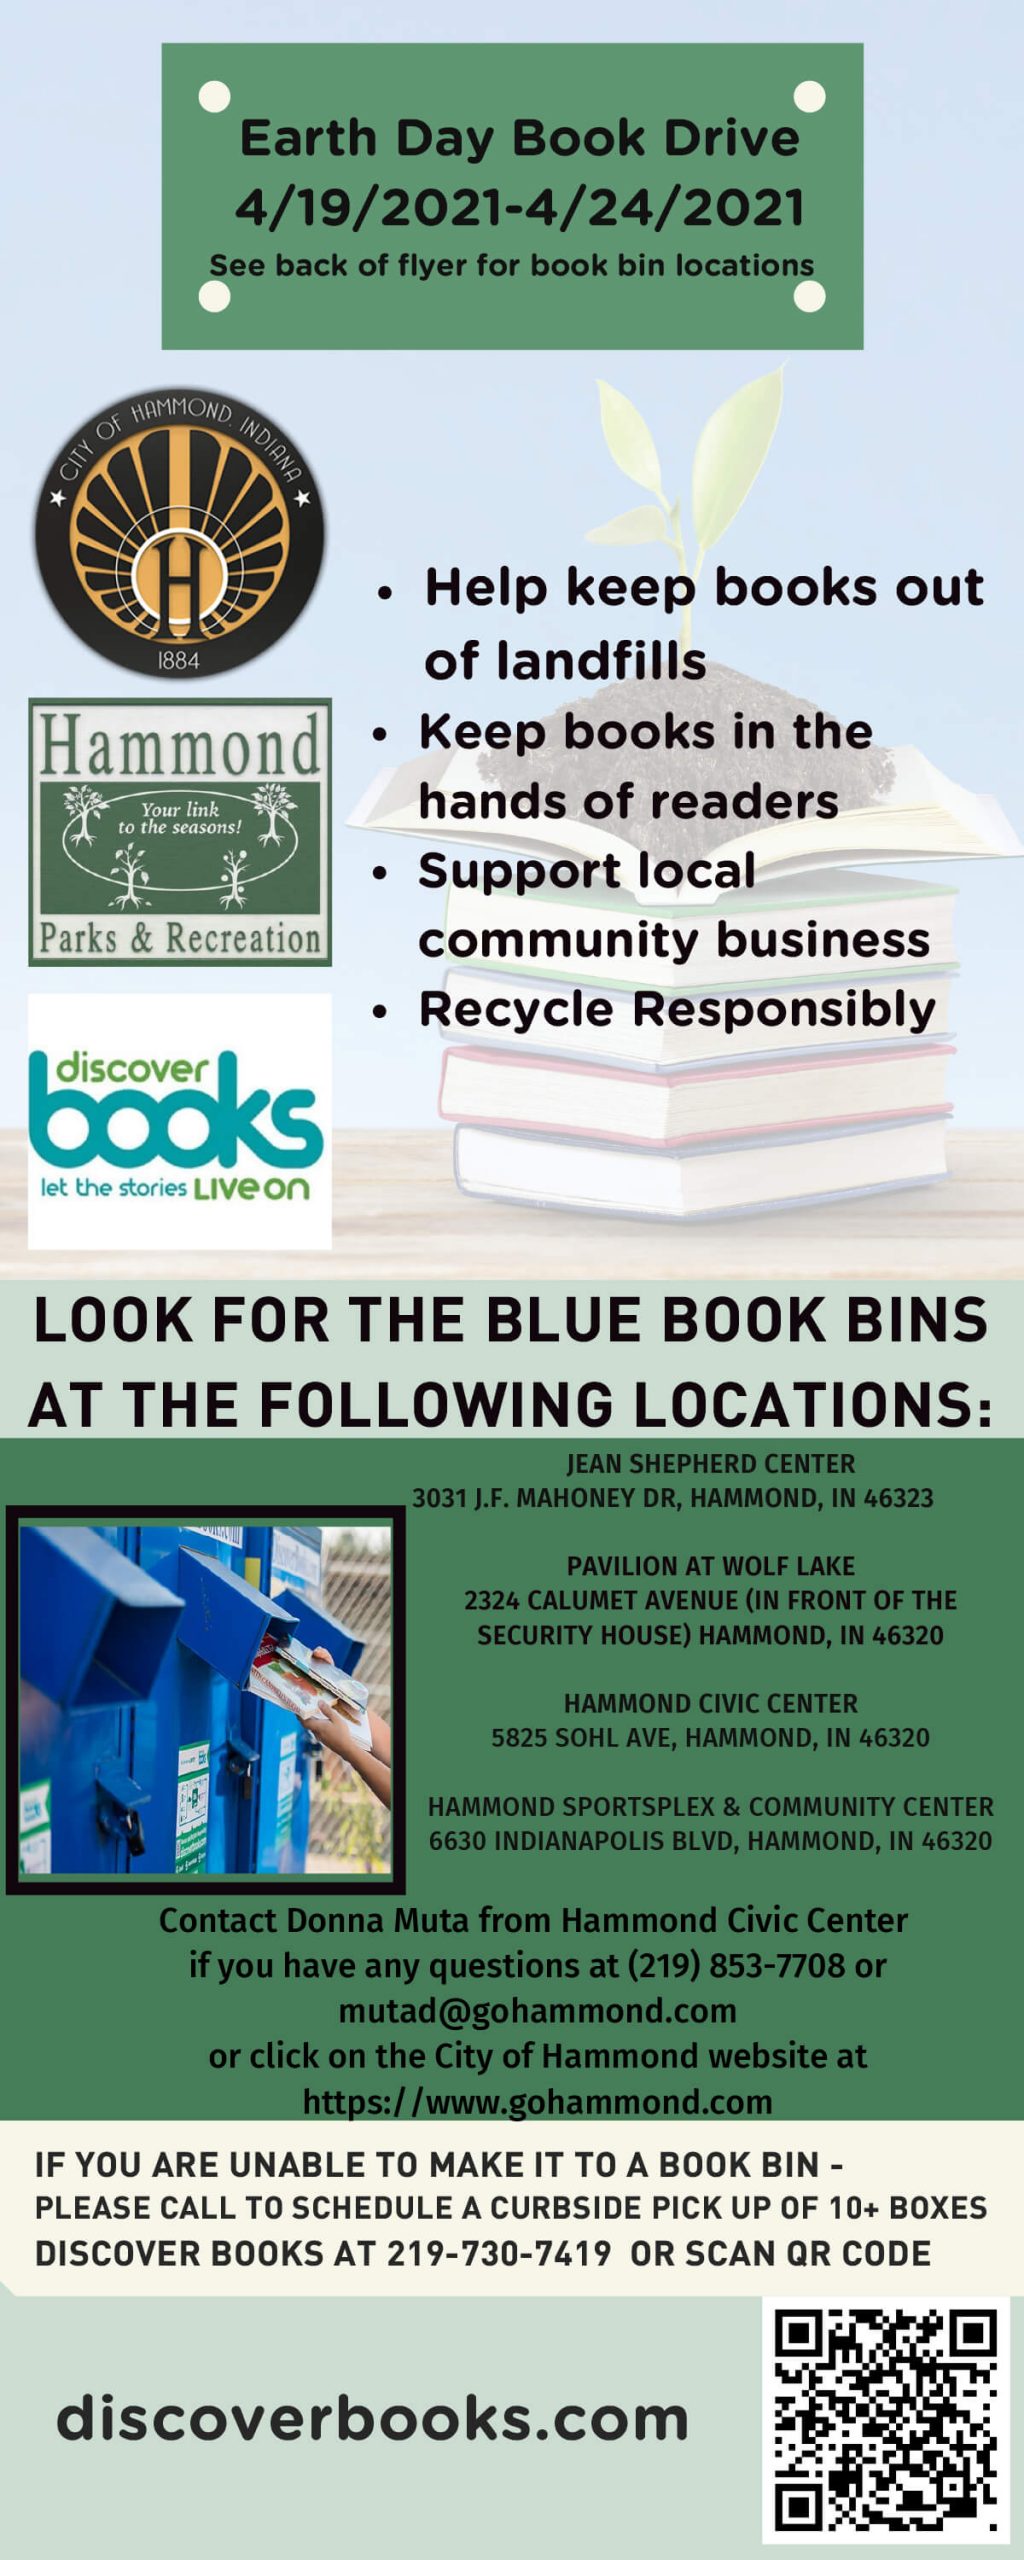 Earth Day Book Drive | City of Hammond, Indiana